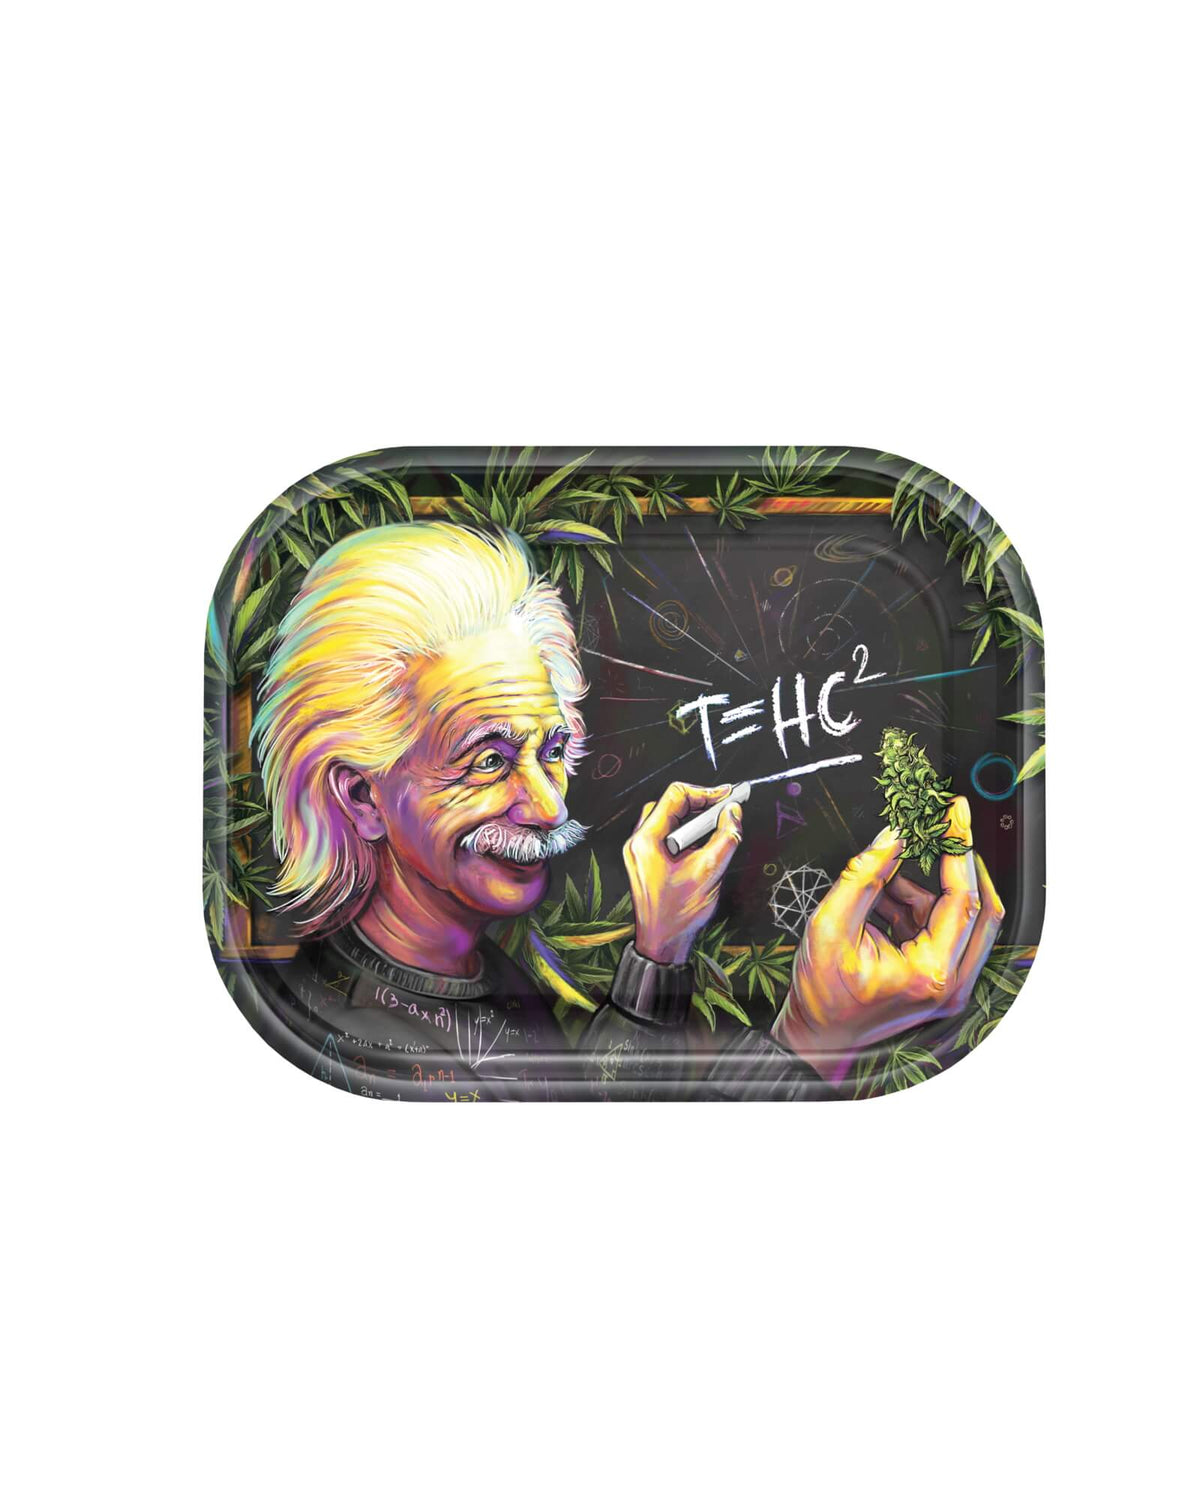 T=HC² Einstein HIGHer Education Metal Tray by V Syndicate